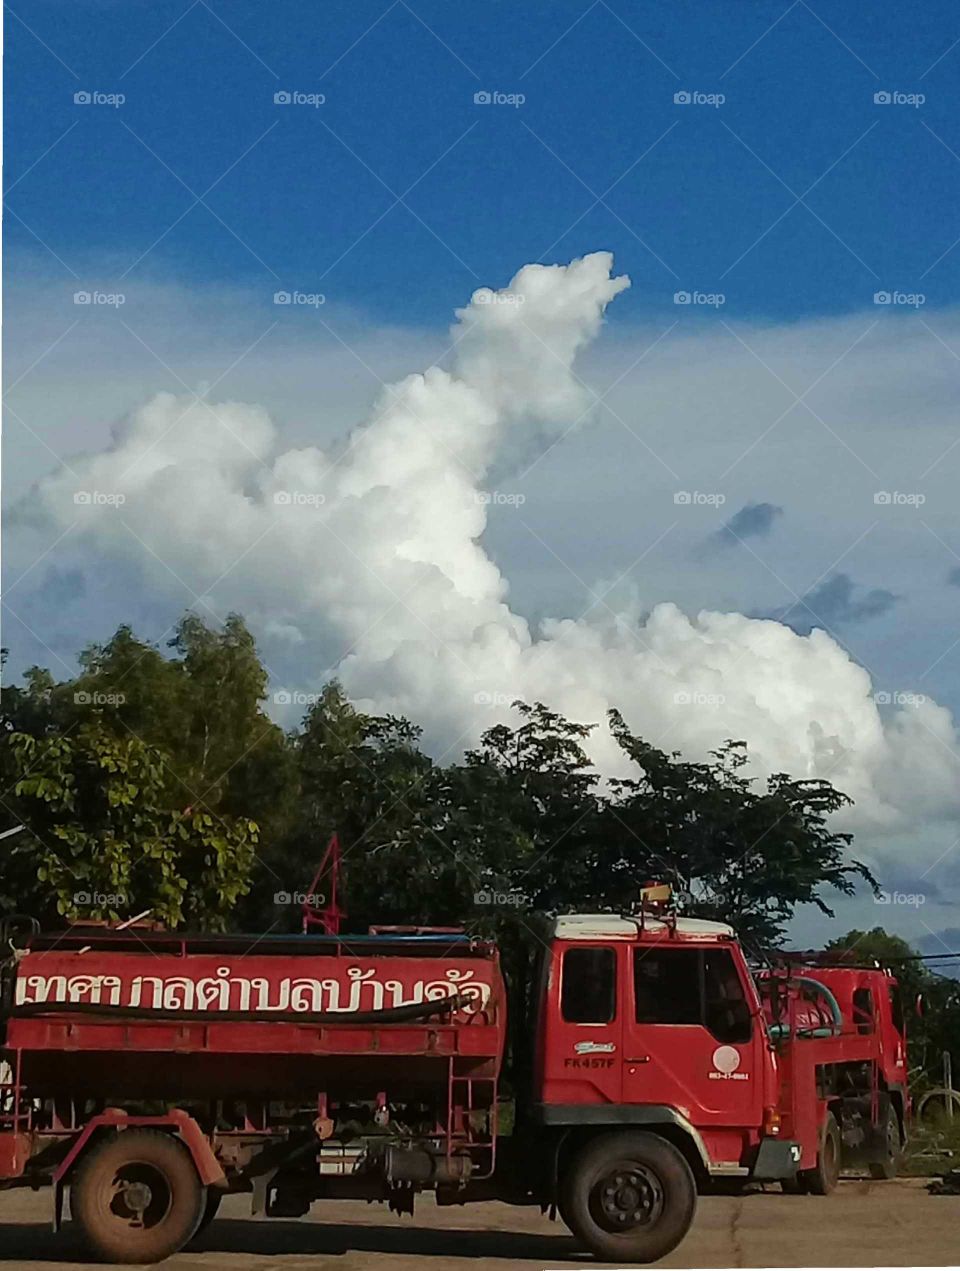 Fire hydrant and the cloud.